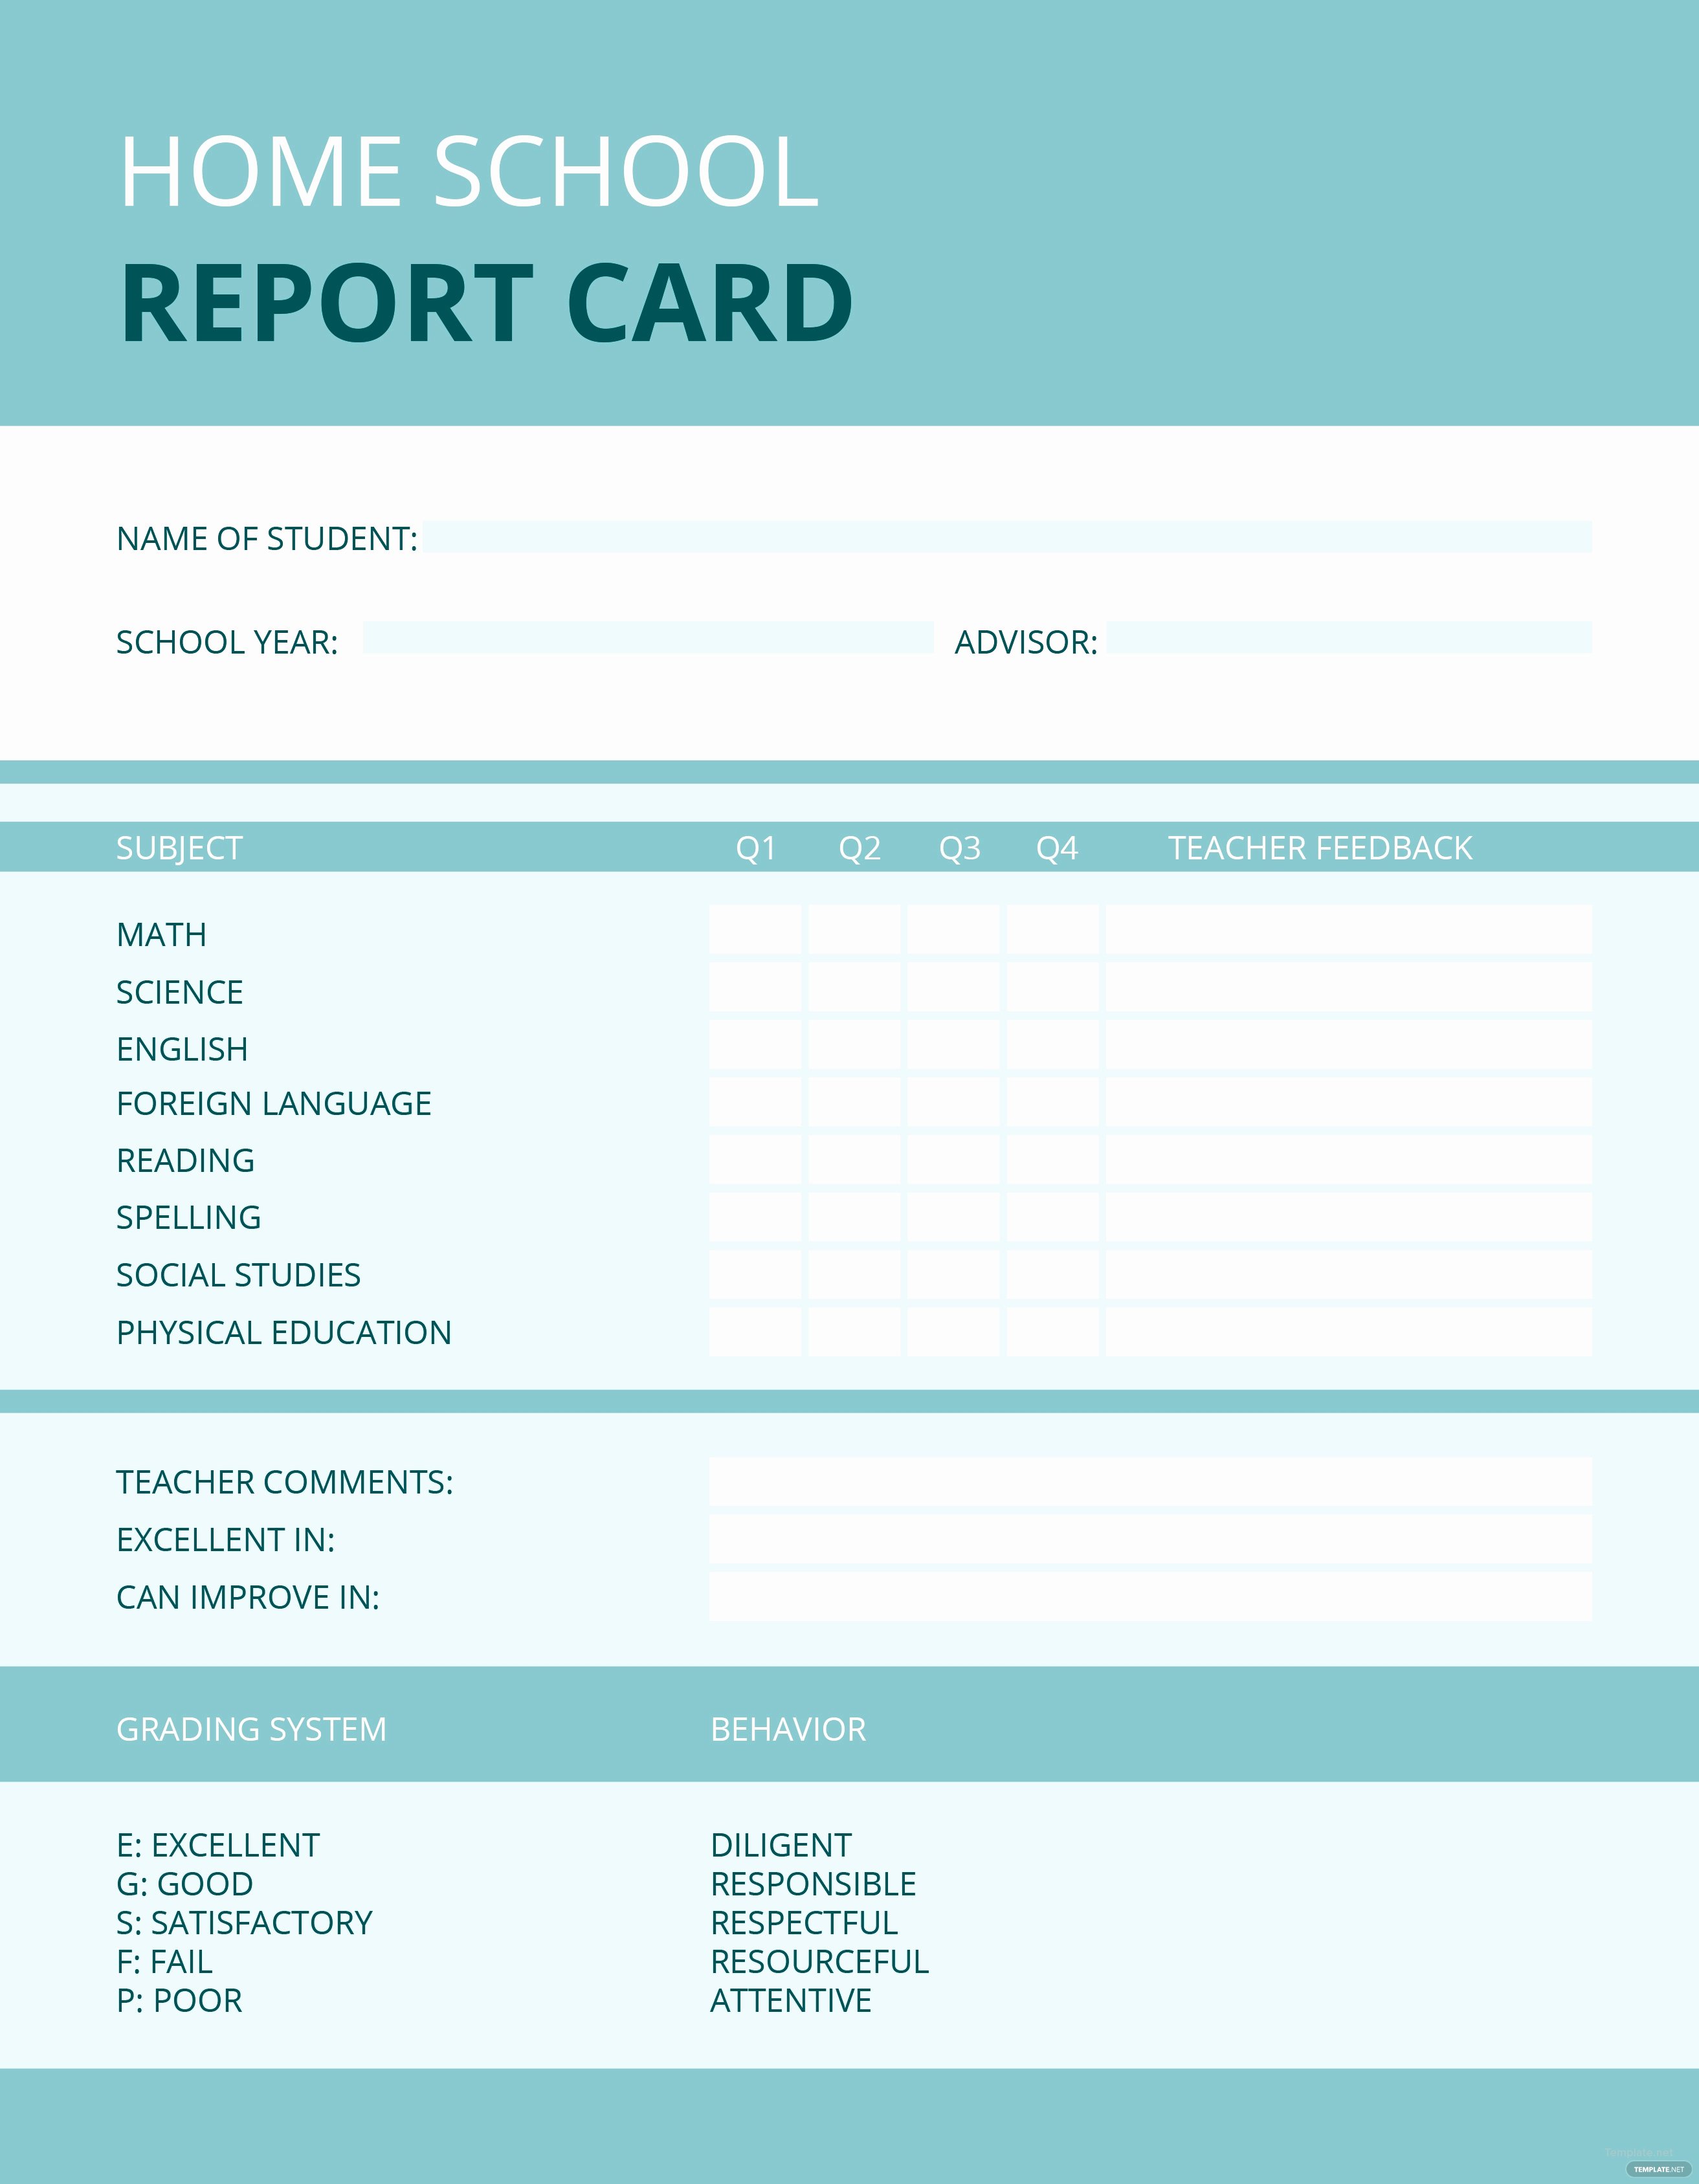 Report Card Template Free Unique Free Home School Report Card Template In Microsoft Word